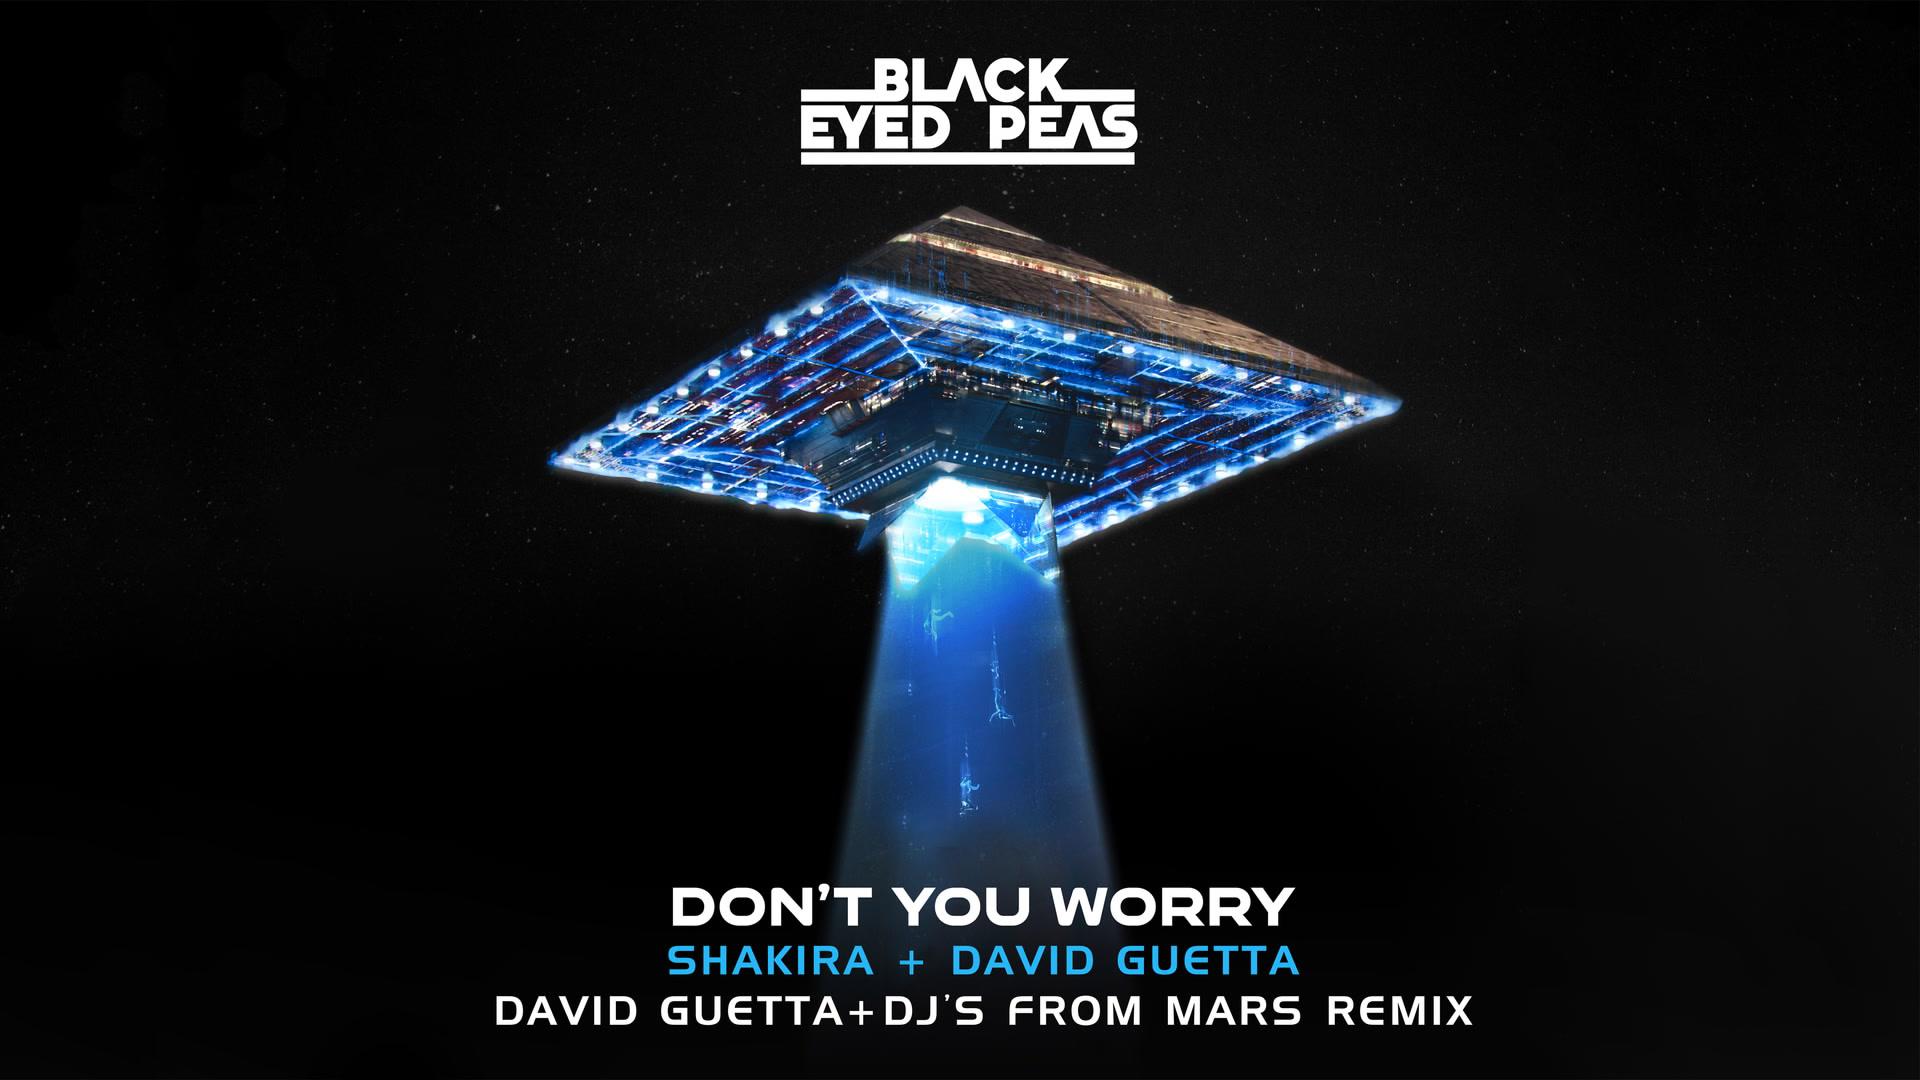 Black Eyed Peas - DON'T YOU WORRY (David Guetta & DJs From Mars Remix - Official Audio)